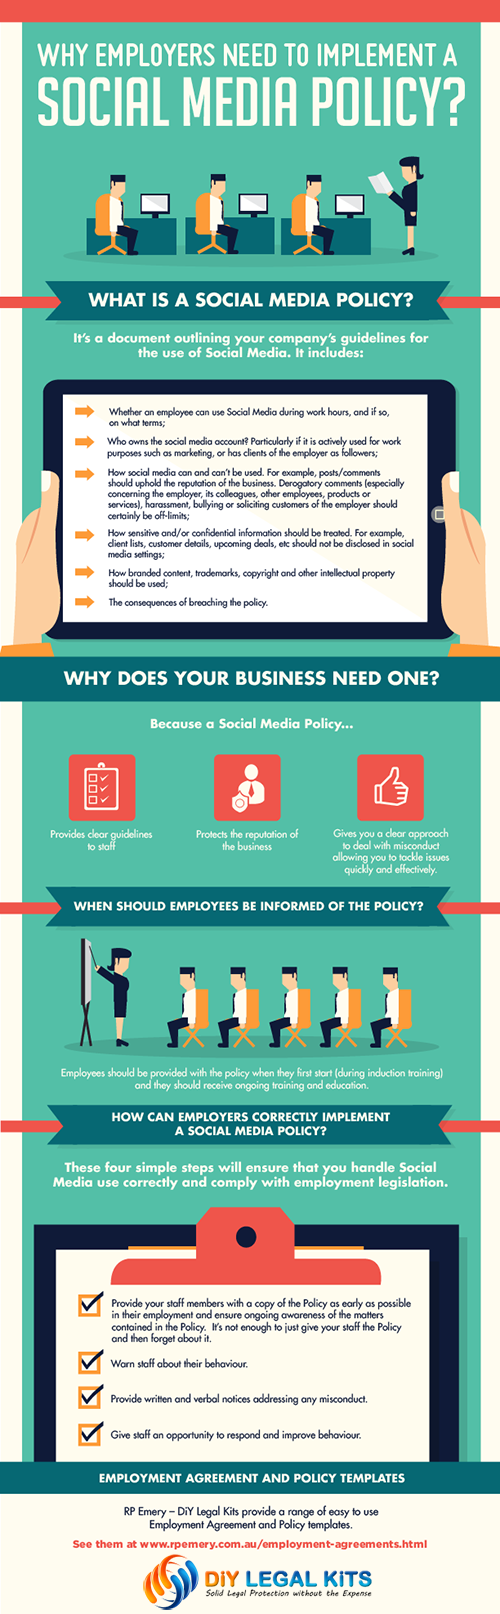 Social Media Policy Infographic - Click to see larger